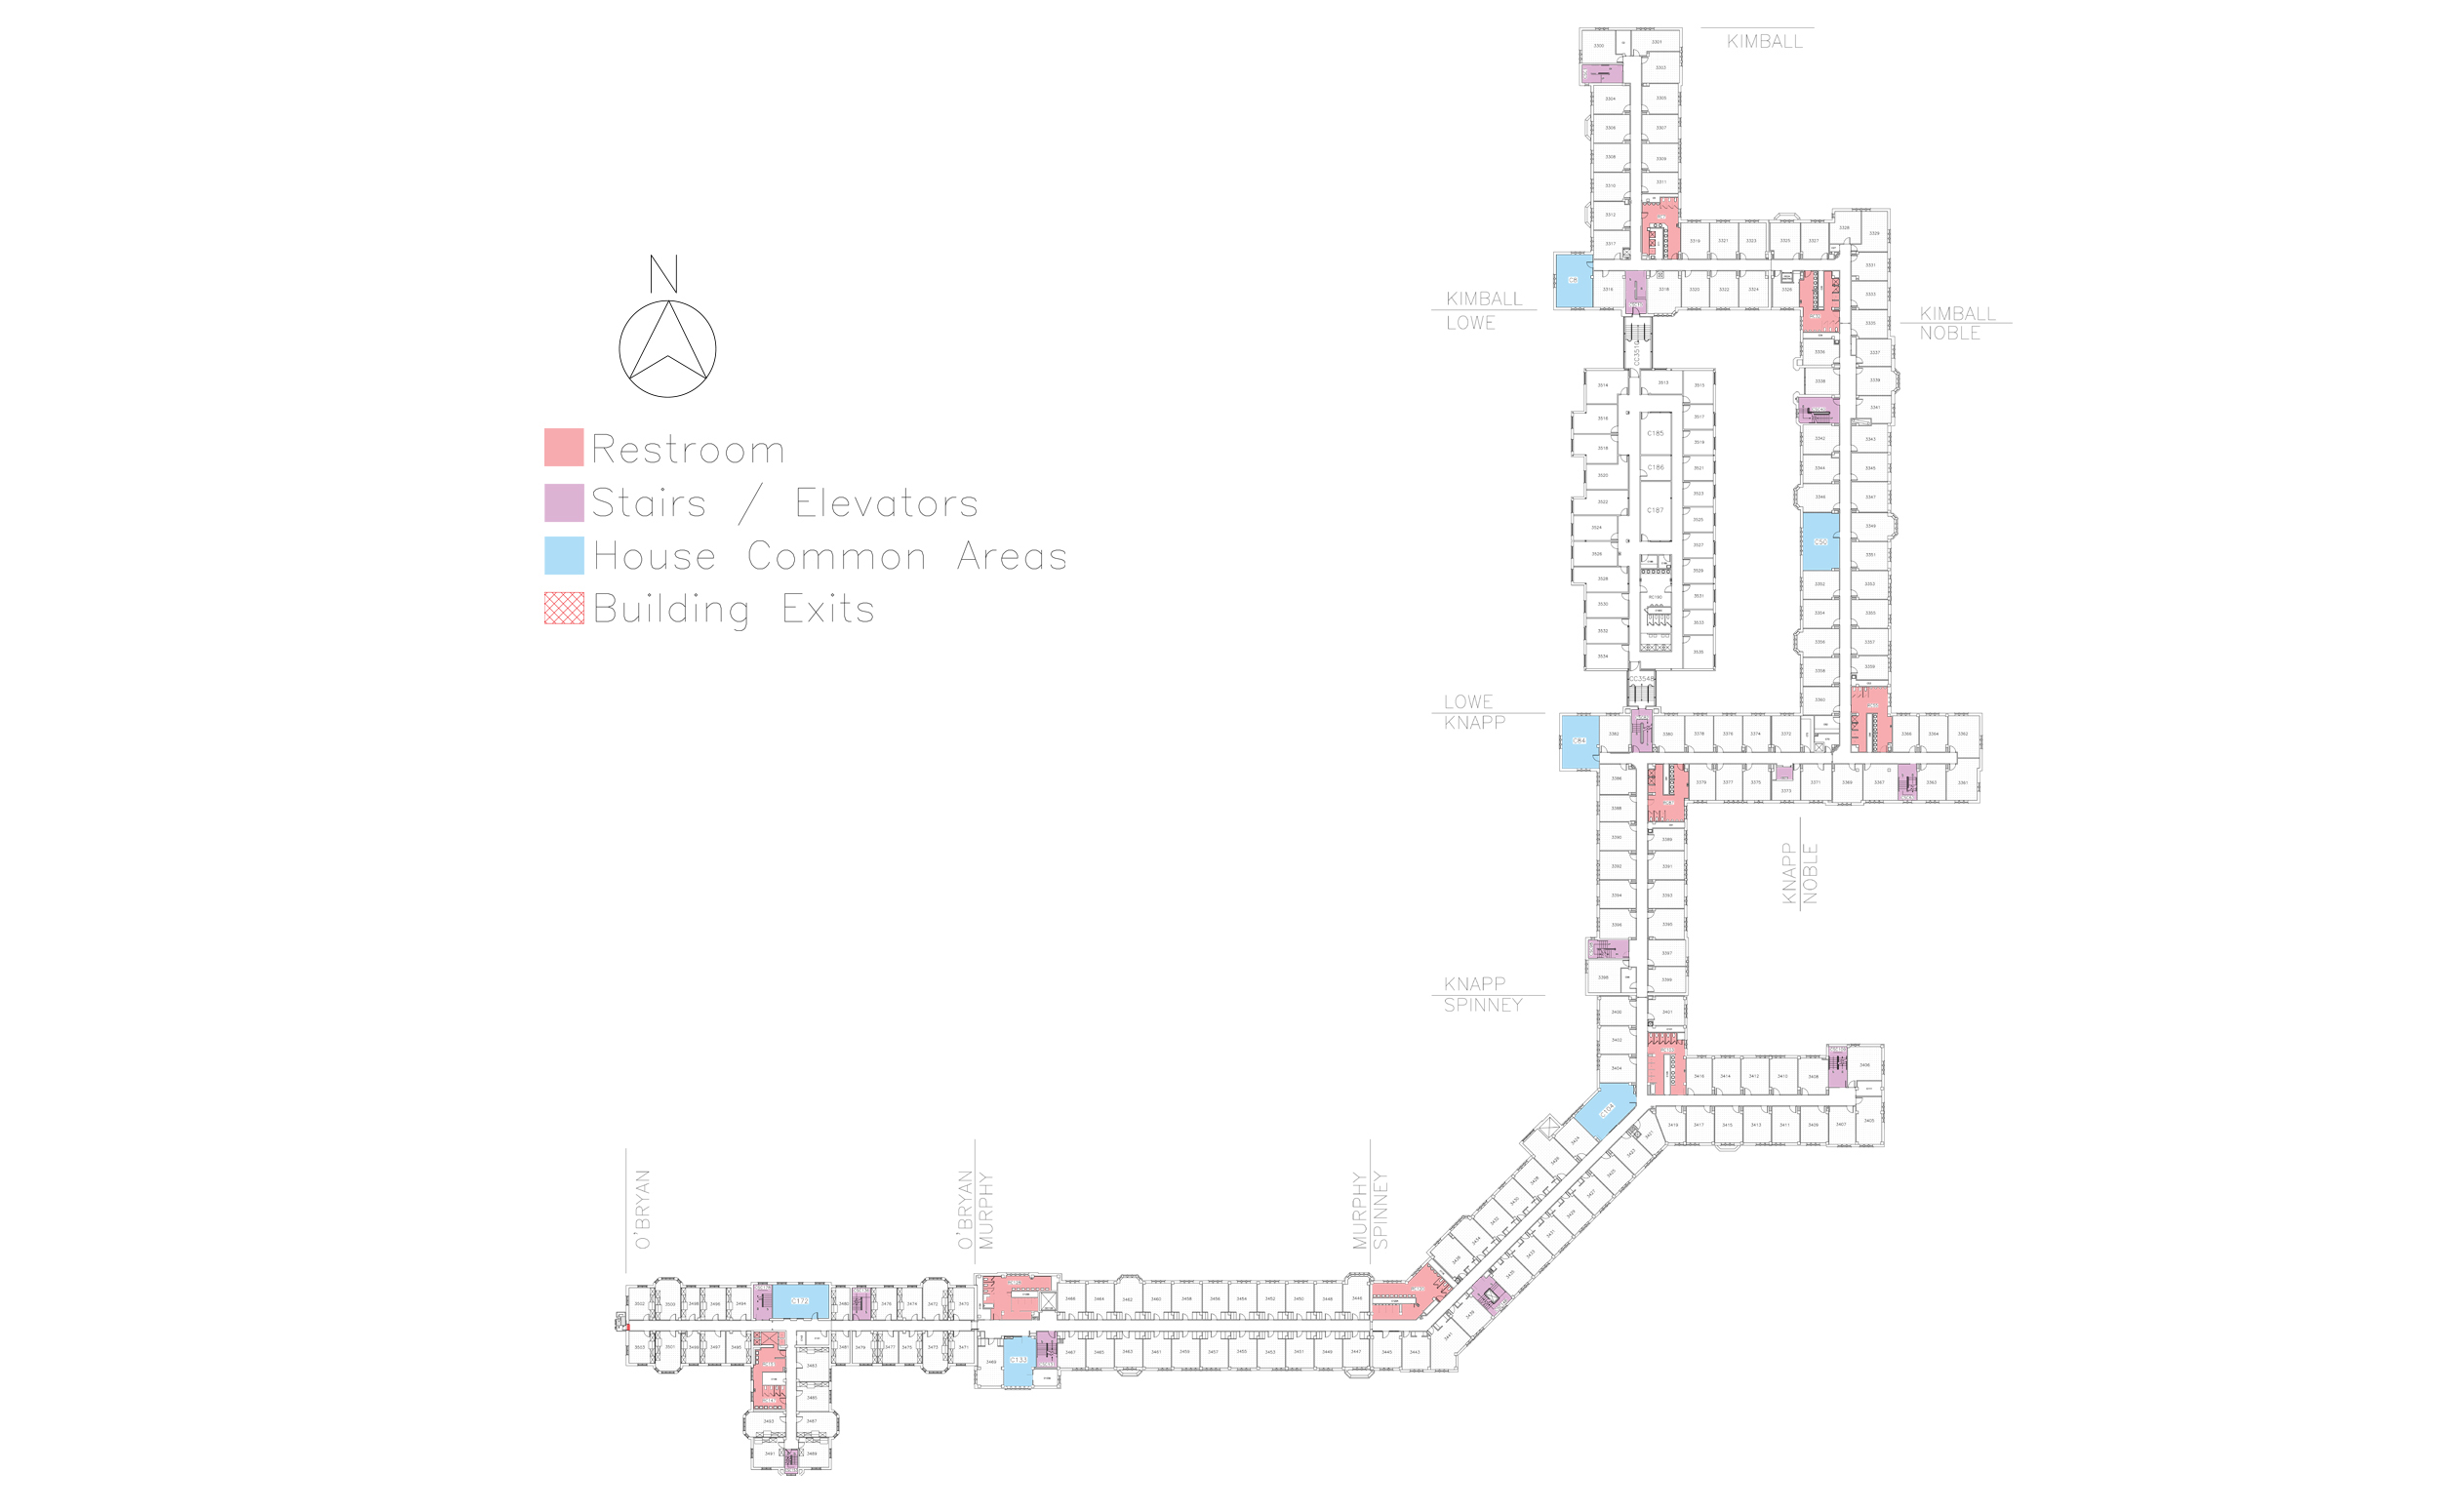 Floor plan showing house locations on the third floor of Friley Hall.